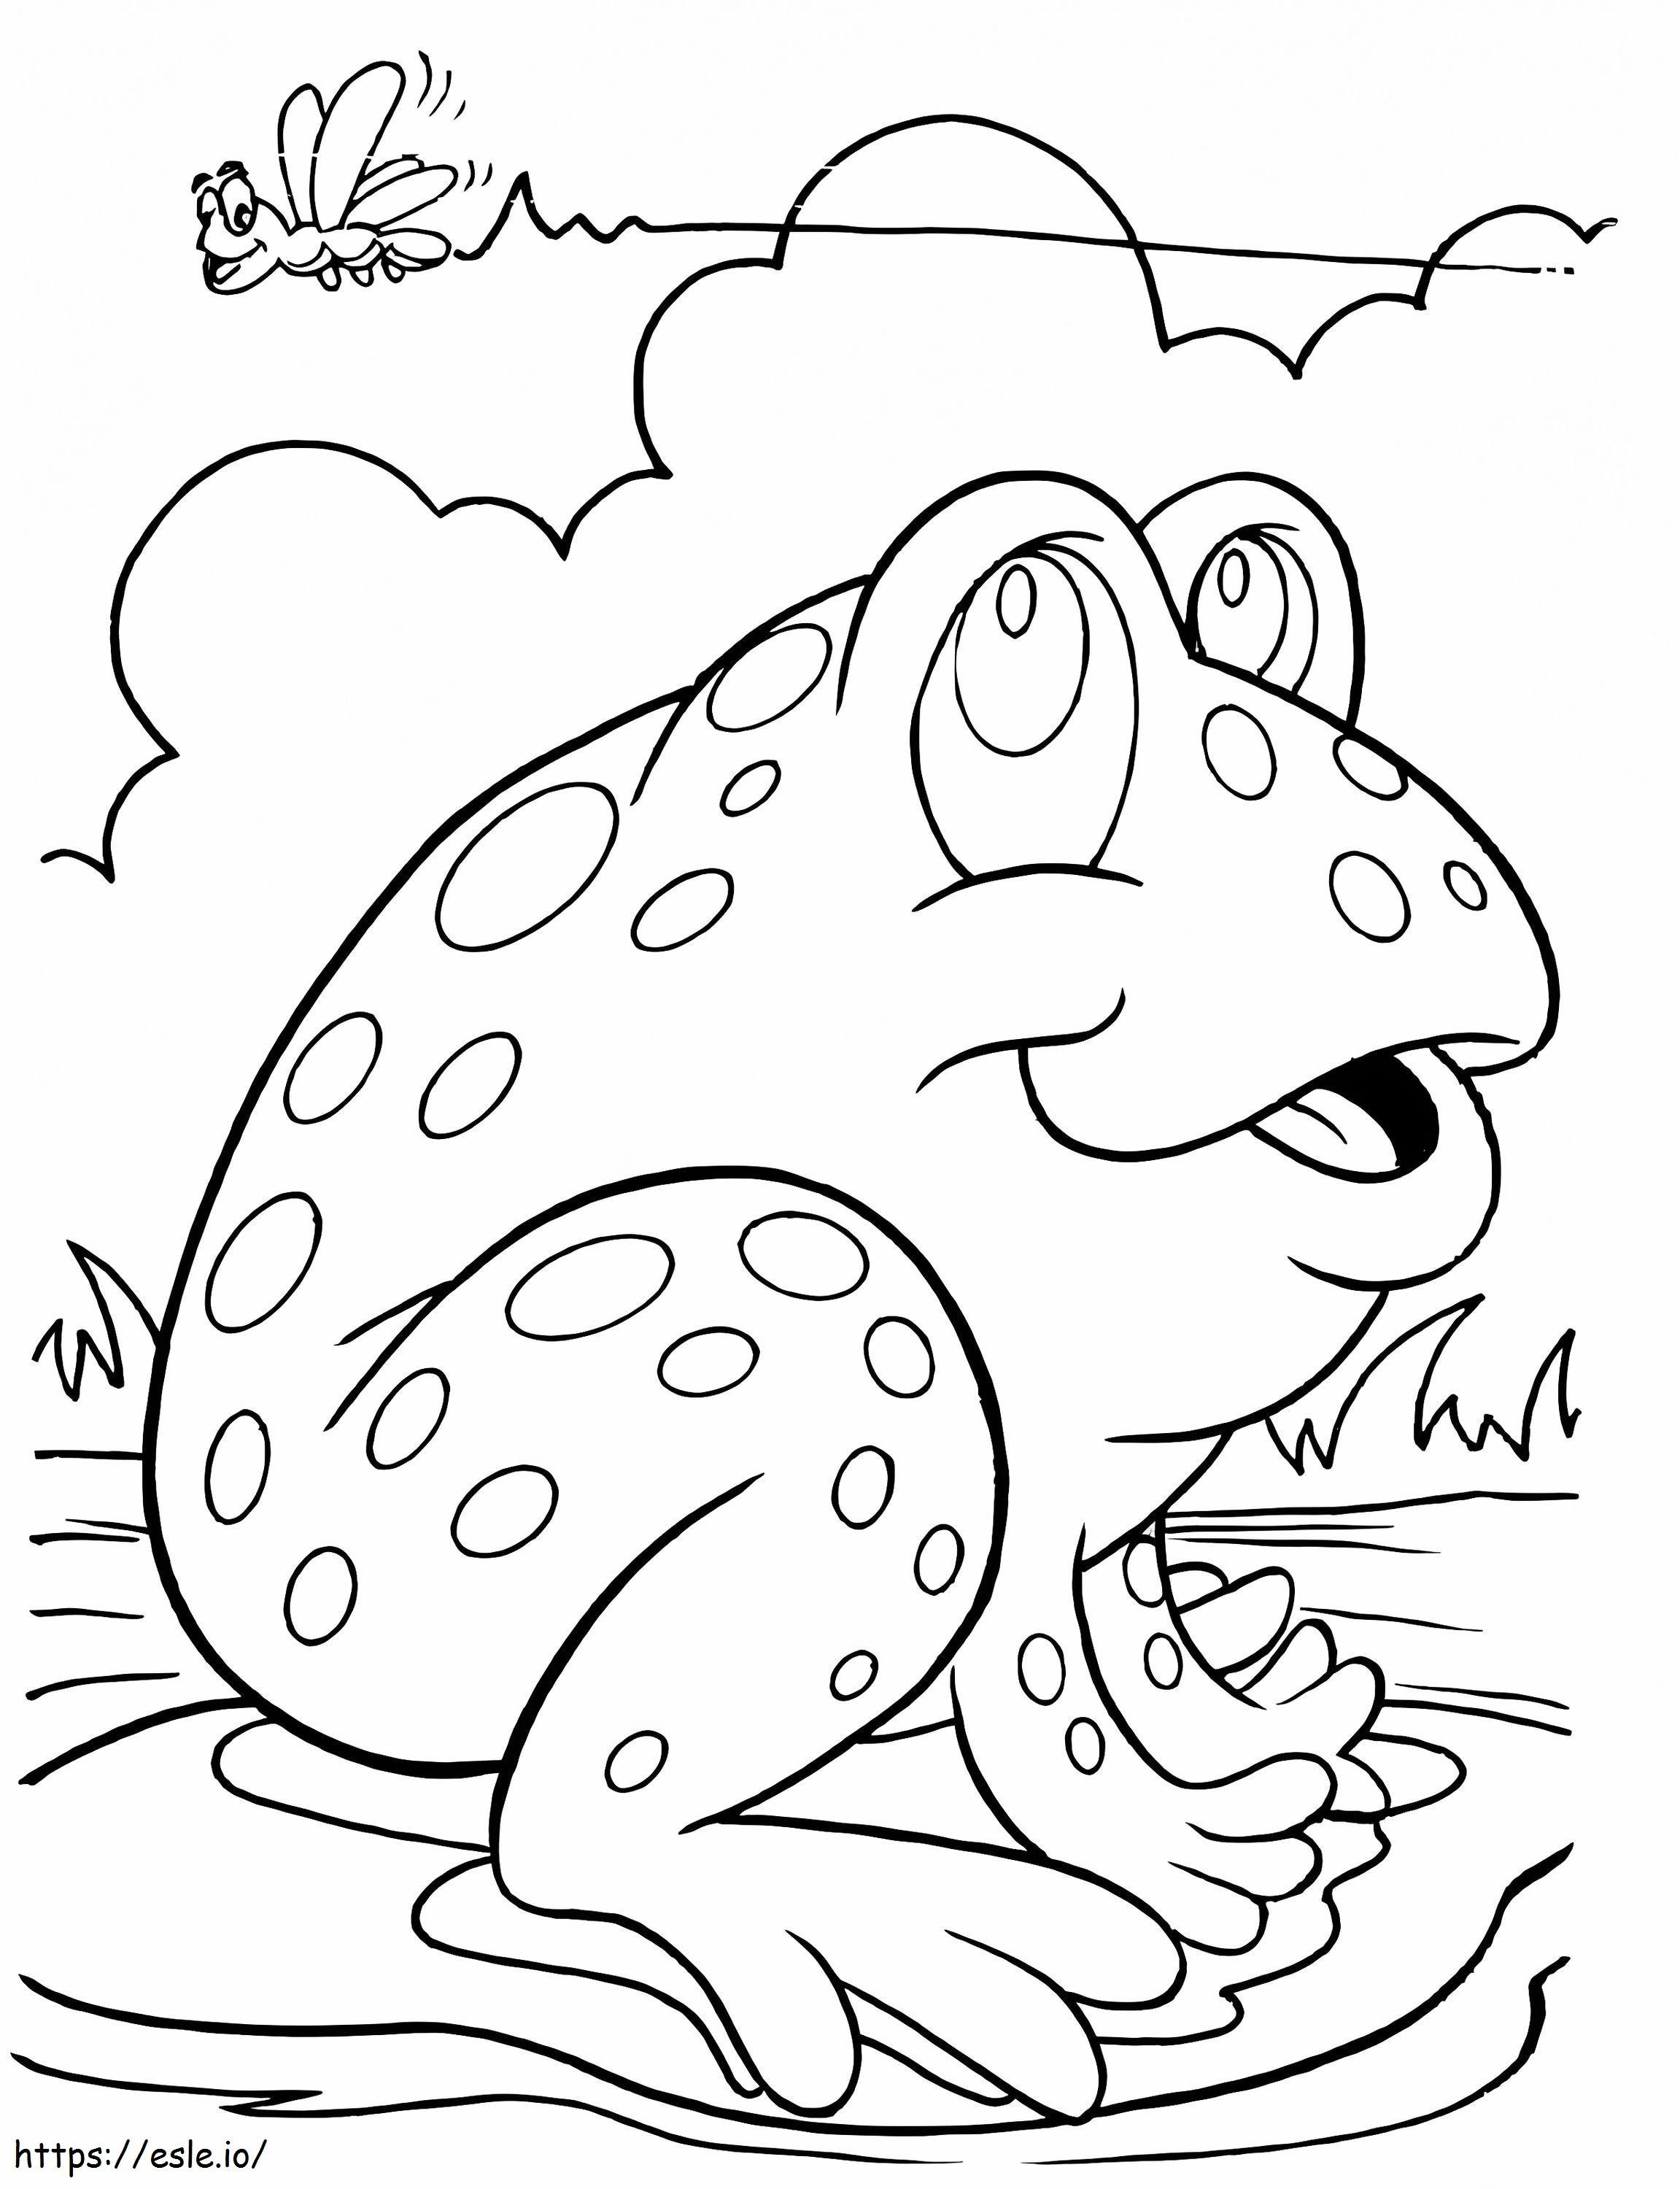 Frog And Insect coloring page